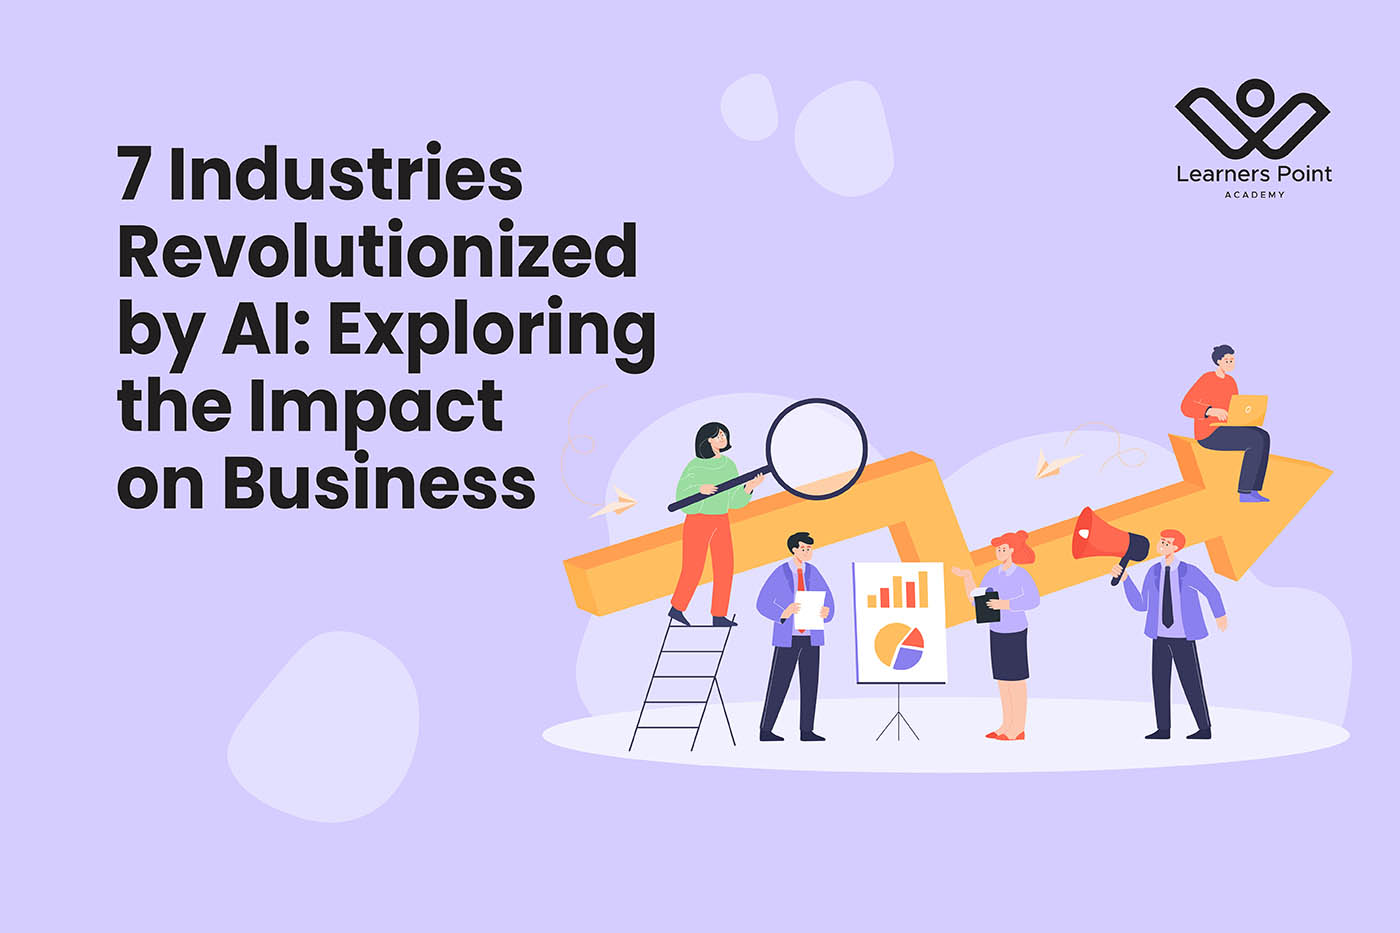 7 Industries Revolutionized by AI: Exploring the Impact on Business